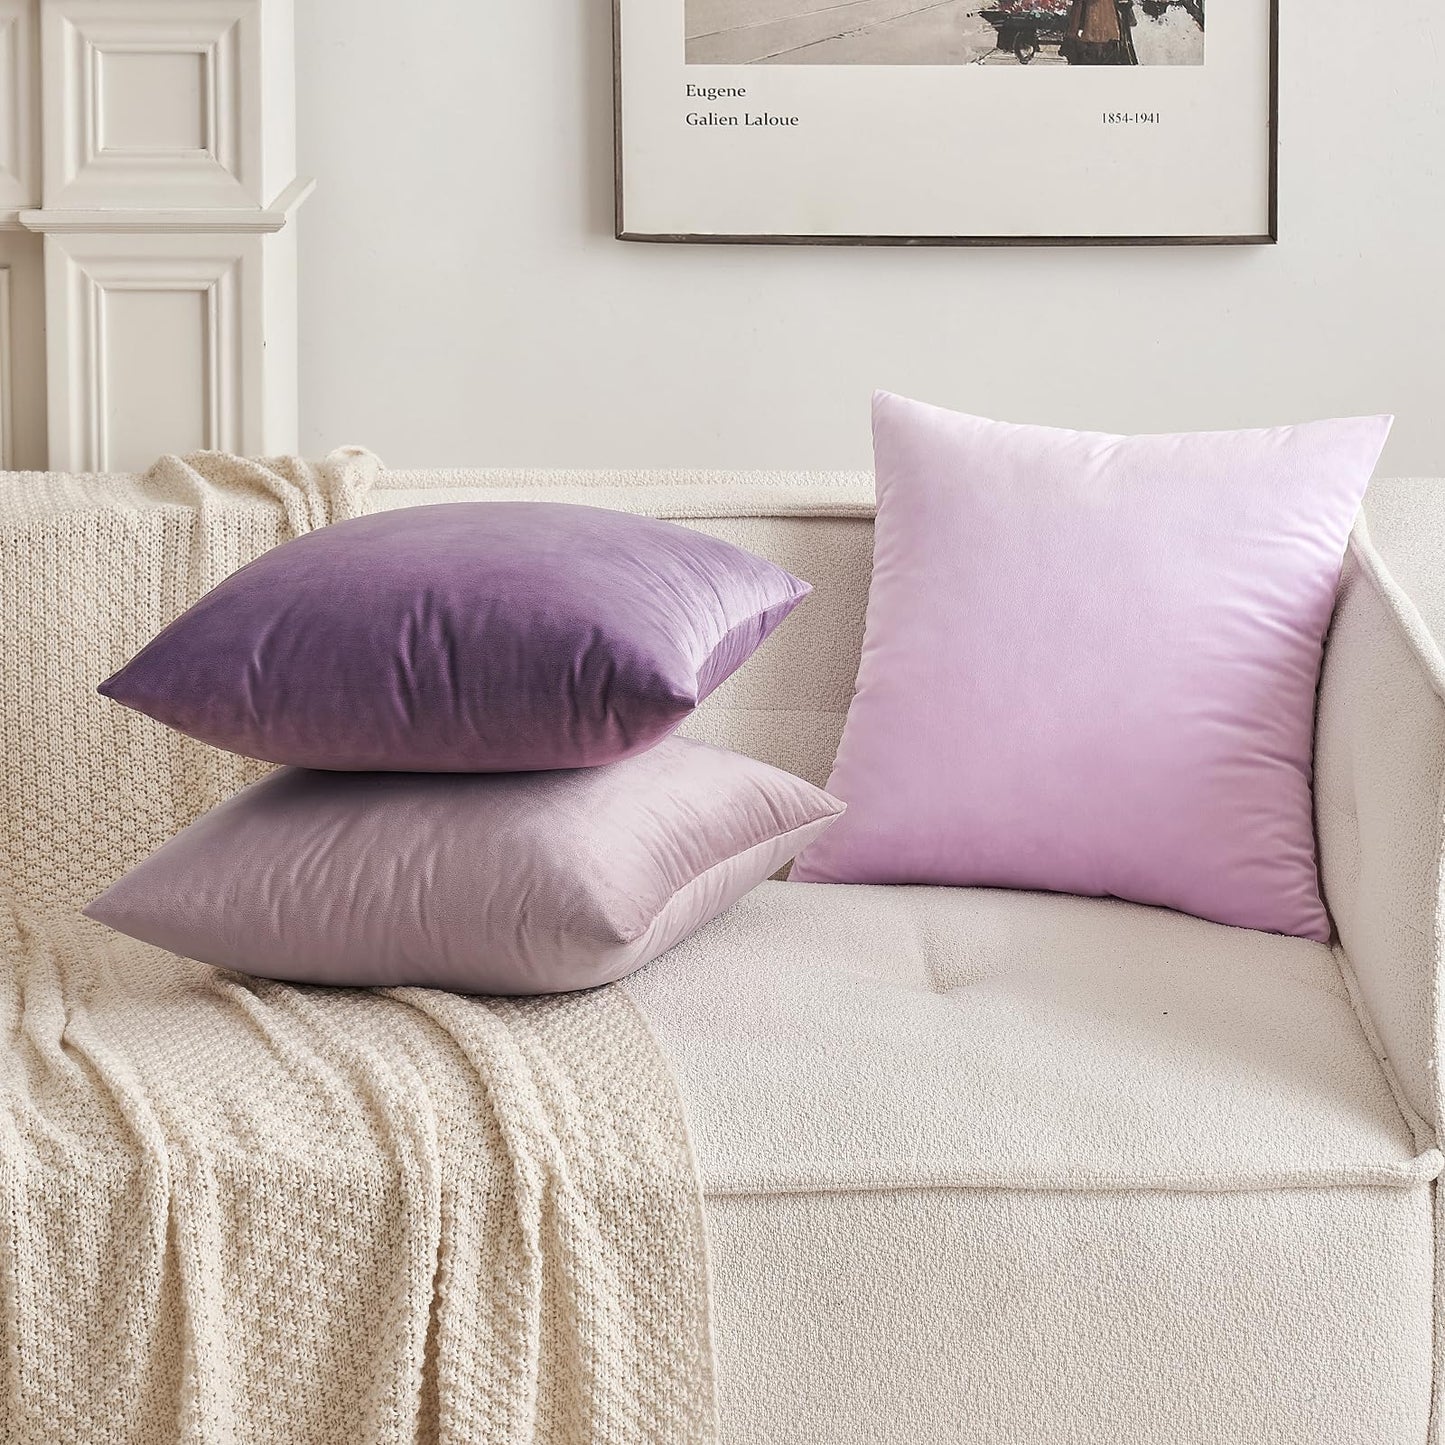 MIULEE Pack of 2 Light Purple Velvet Throw Pillow Covers 18x18 Inch Soft Solid Decorative Square Set Cushion Cases for Spring Couch Sofa Bedroom